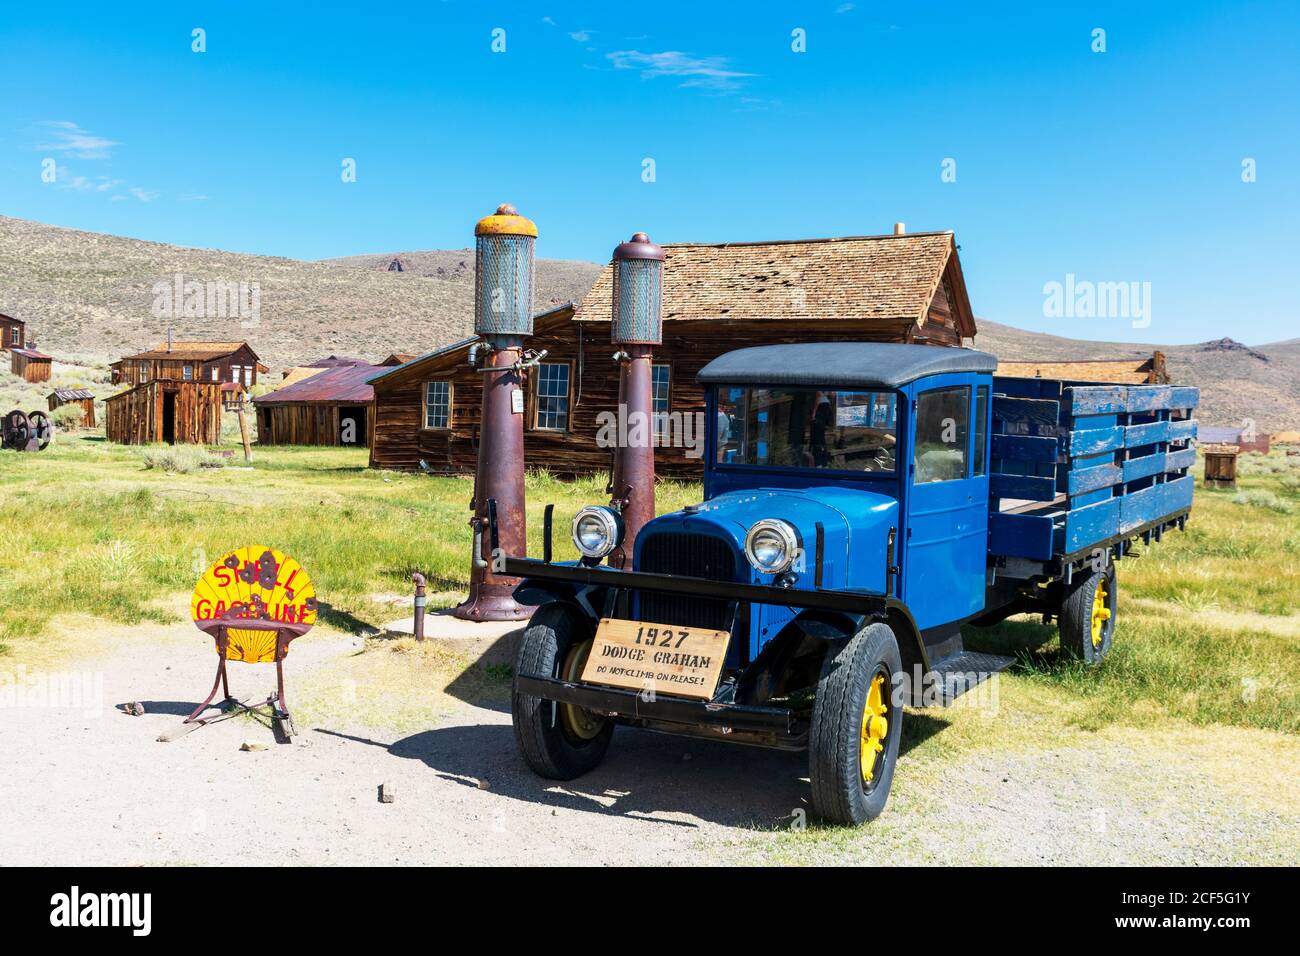 Blue Dodge Graham 1927 parked outdoor near vintage Shell gas station at Bodie State Historic Park - Bodie, California, USA - 2020 Stock Photo